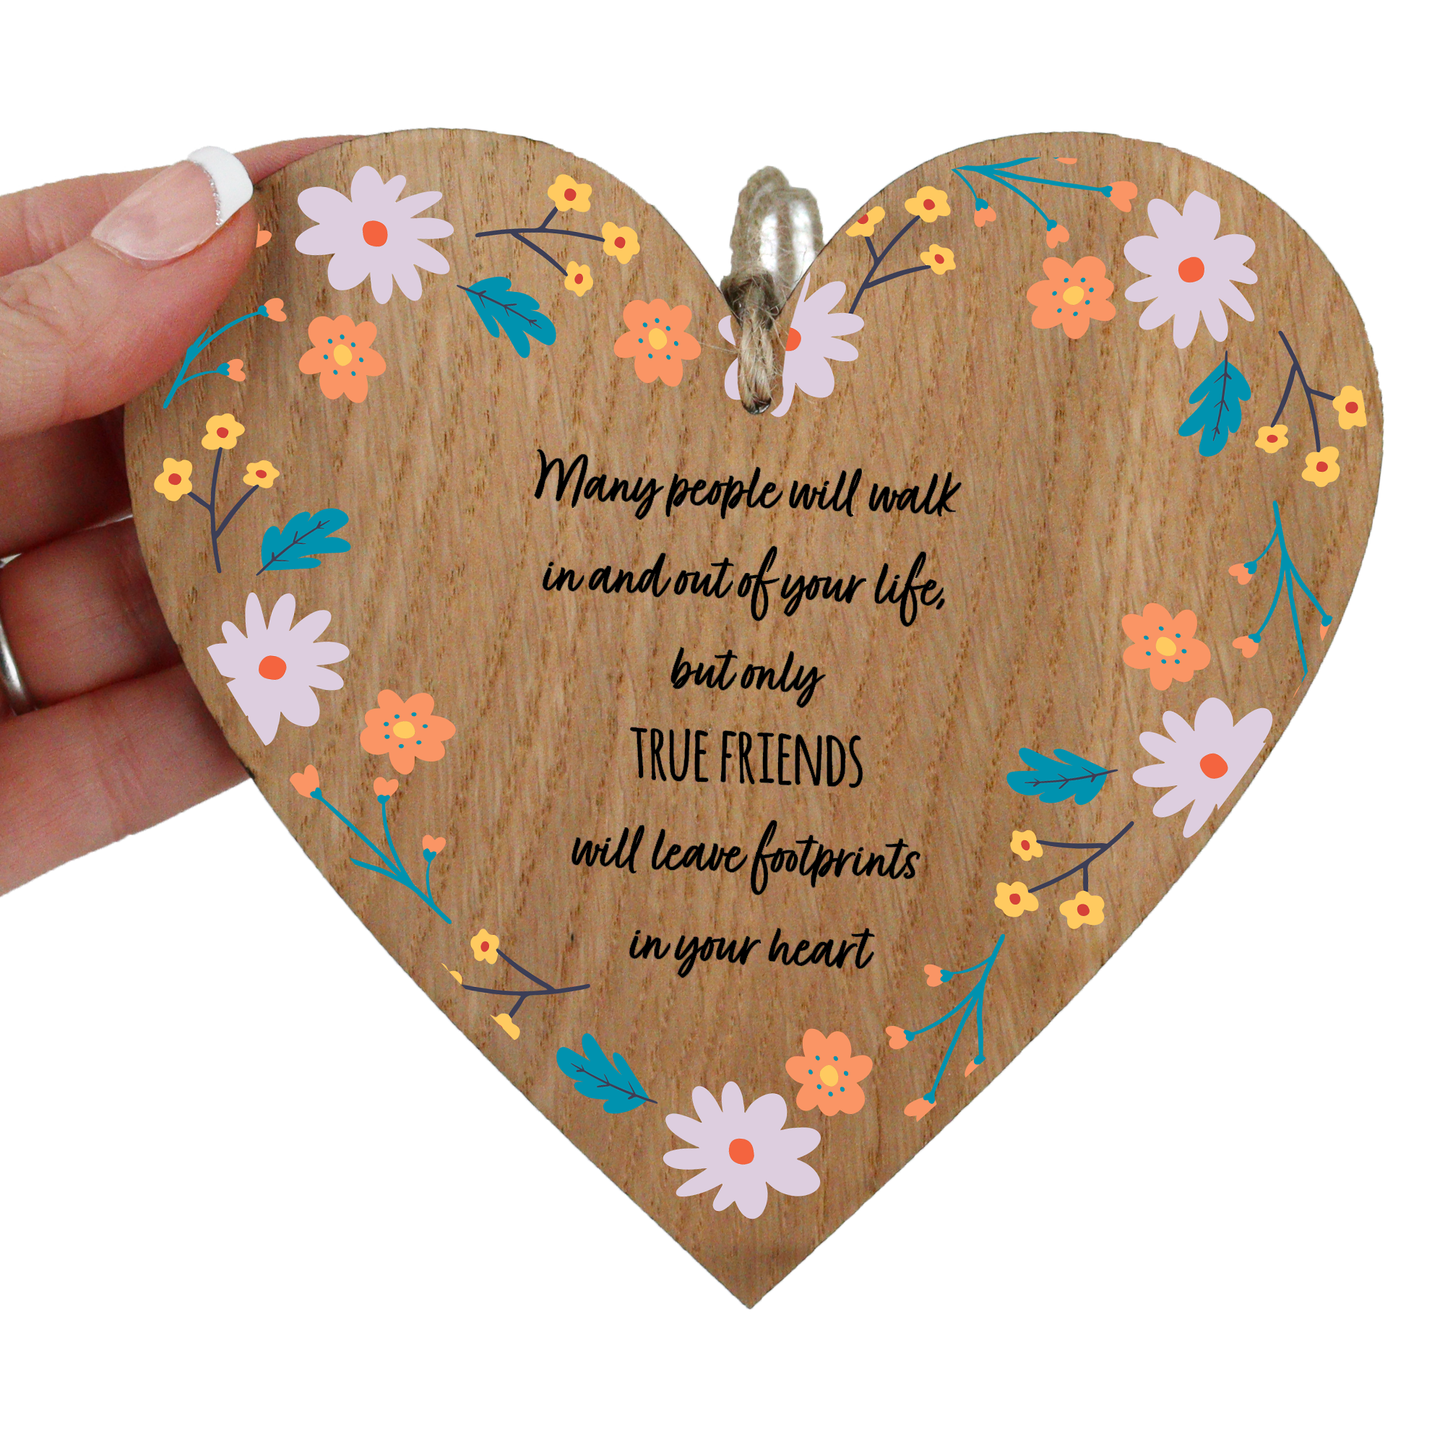 Only the best friends leave footprints on your heart wooden hanging heart plaque